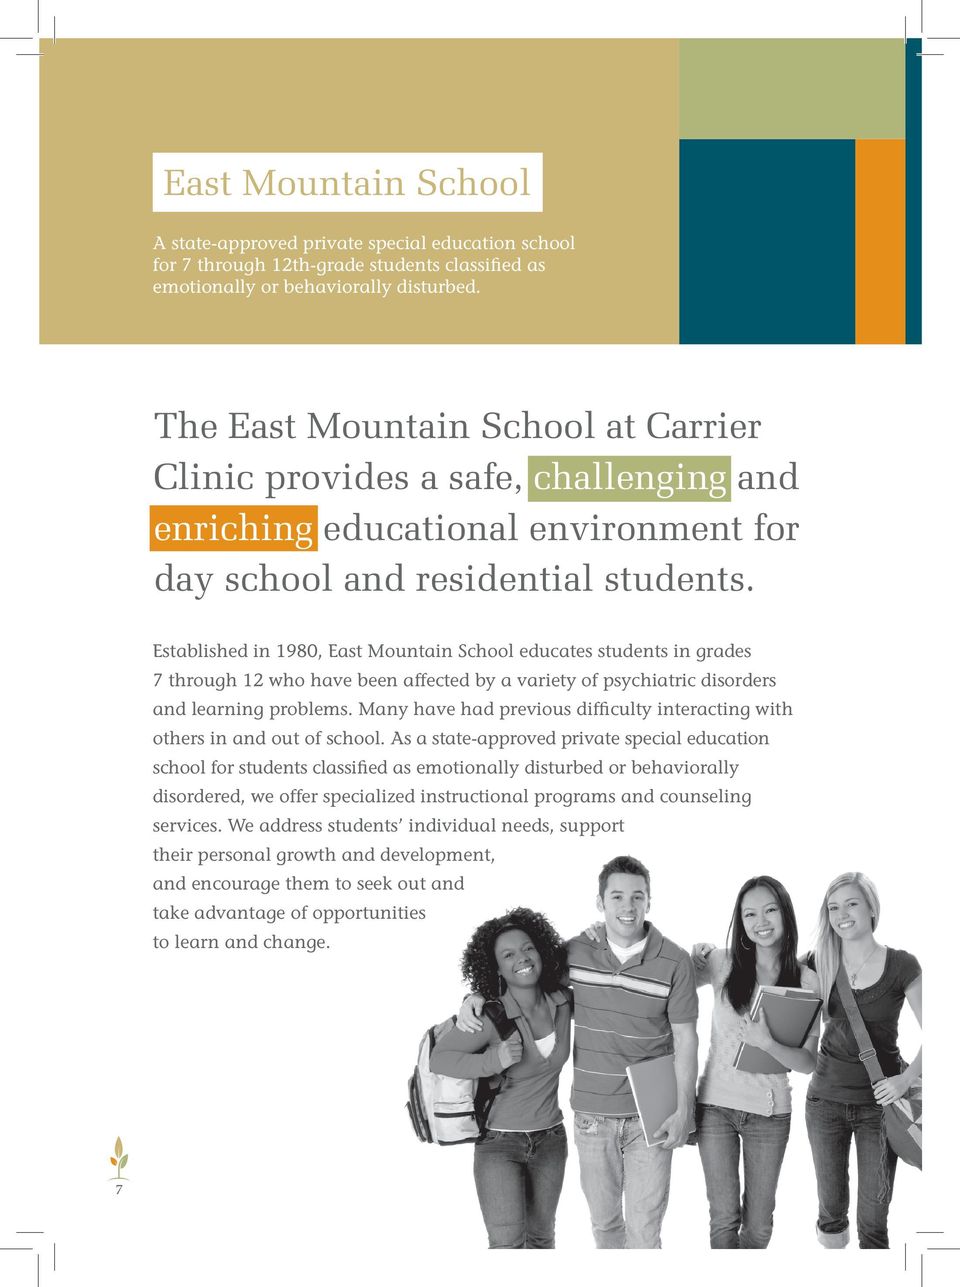 Established in 1980, East Mountain School educates students in grades 7 through 12 who have been affected by a variety of psychiatric disorders and learning problems.